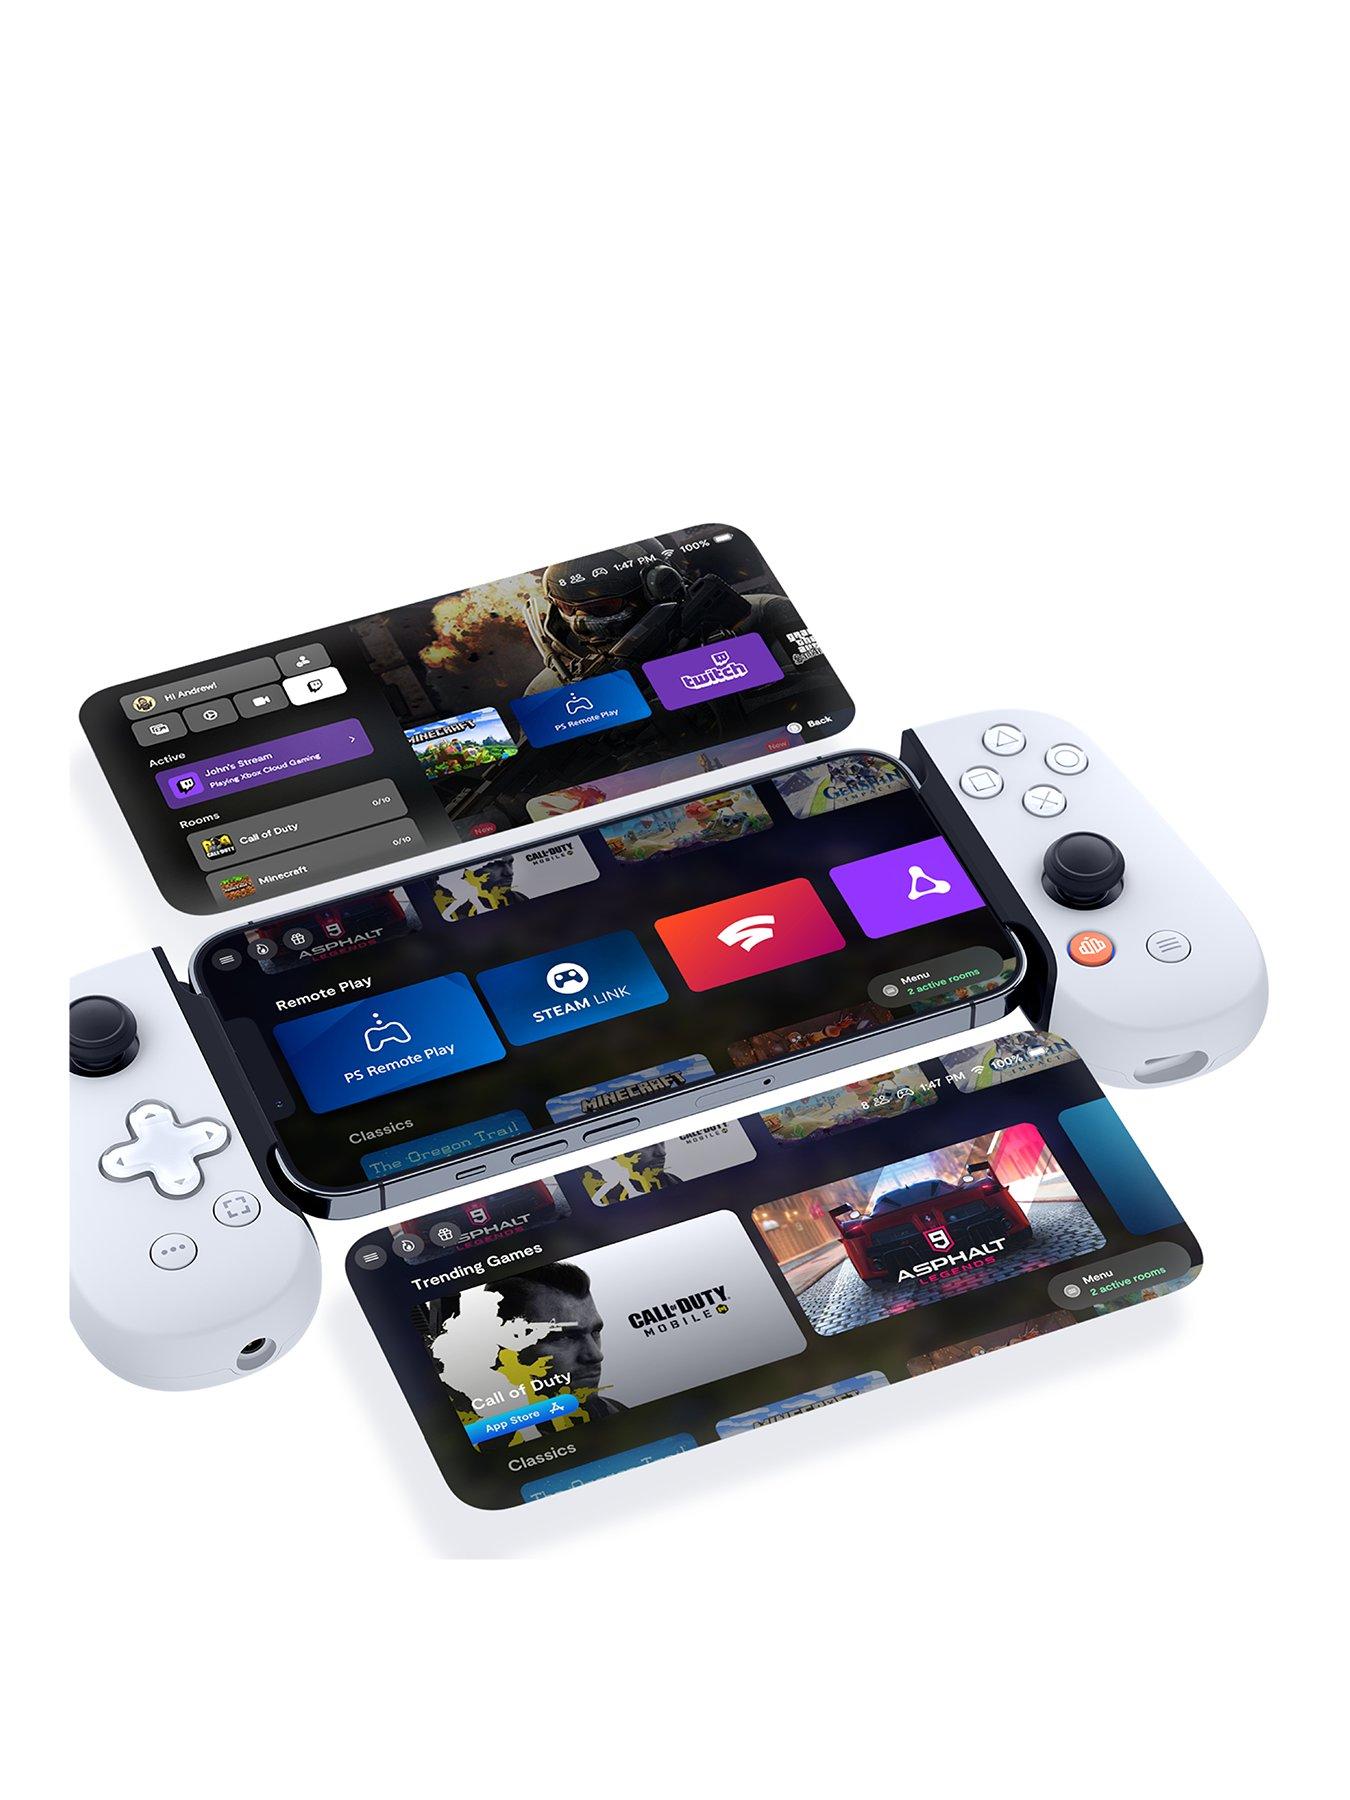 Backbone One Mobile Gaming Controller for iPhone - PlayStation Edition